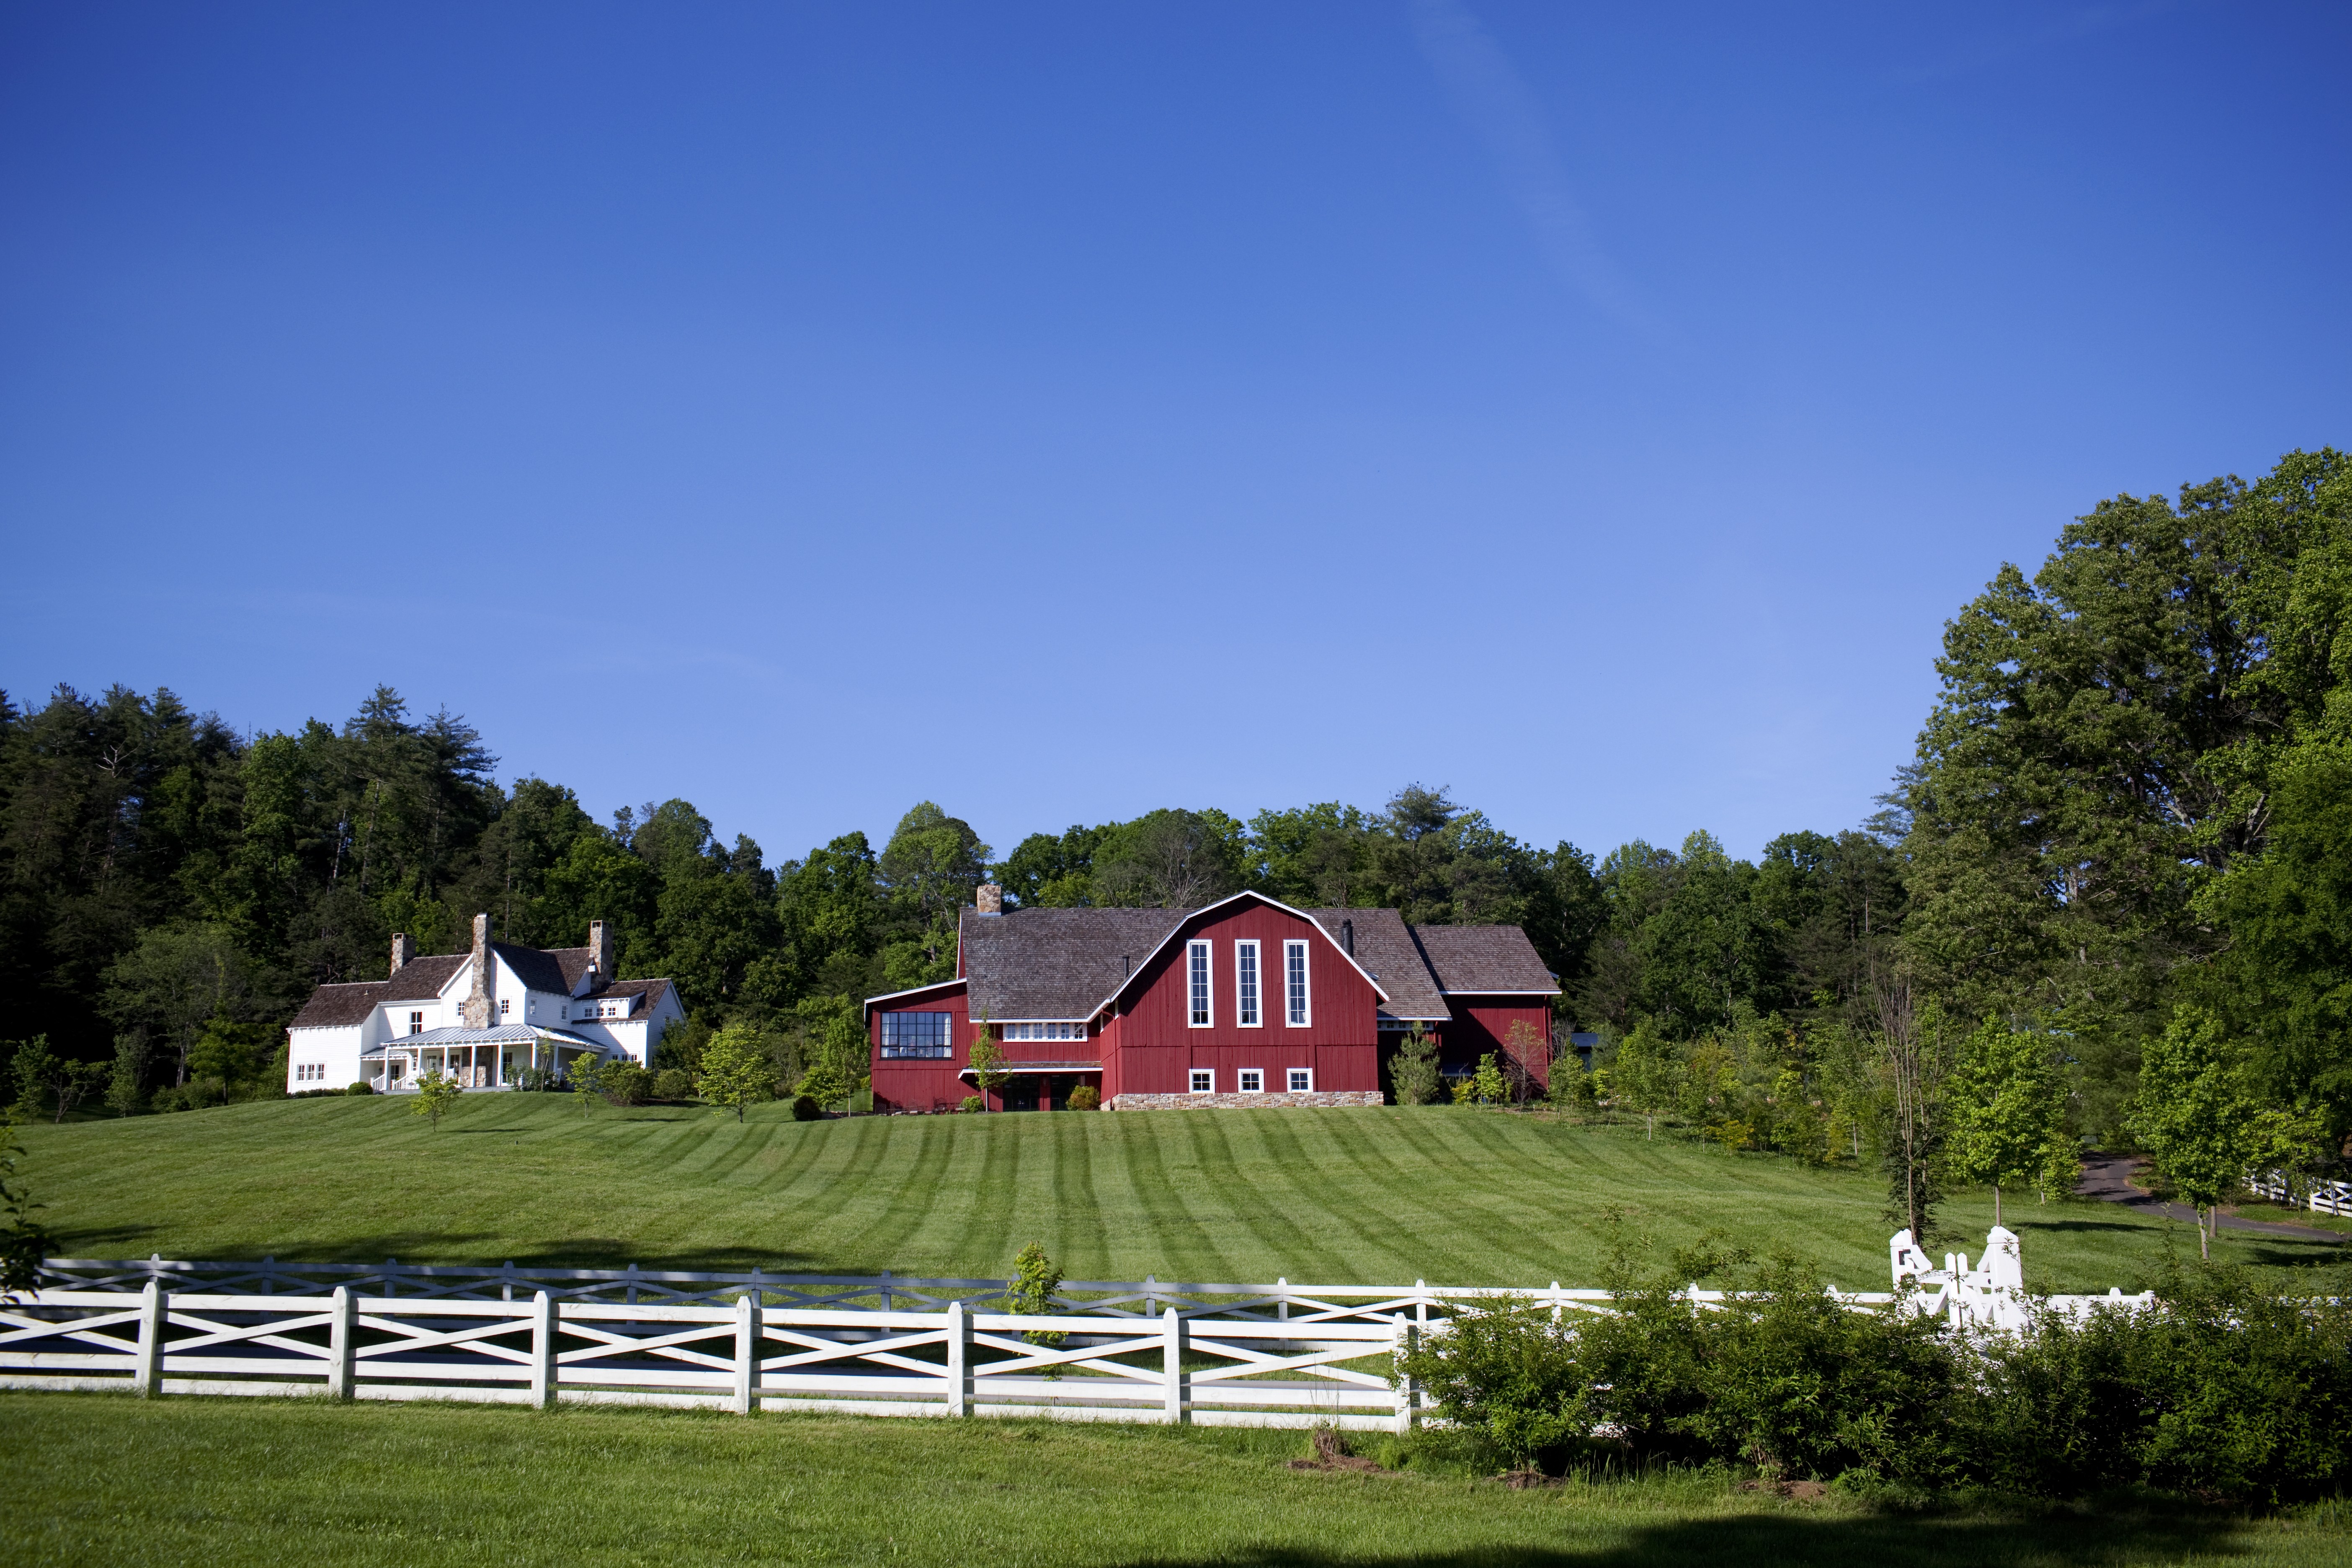 What are some activities at Blackberry Farm in Tennessee?